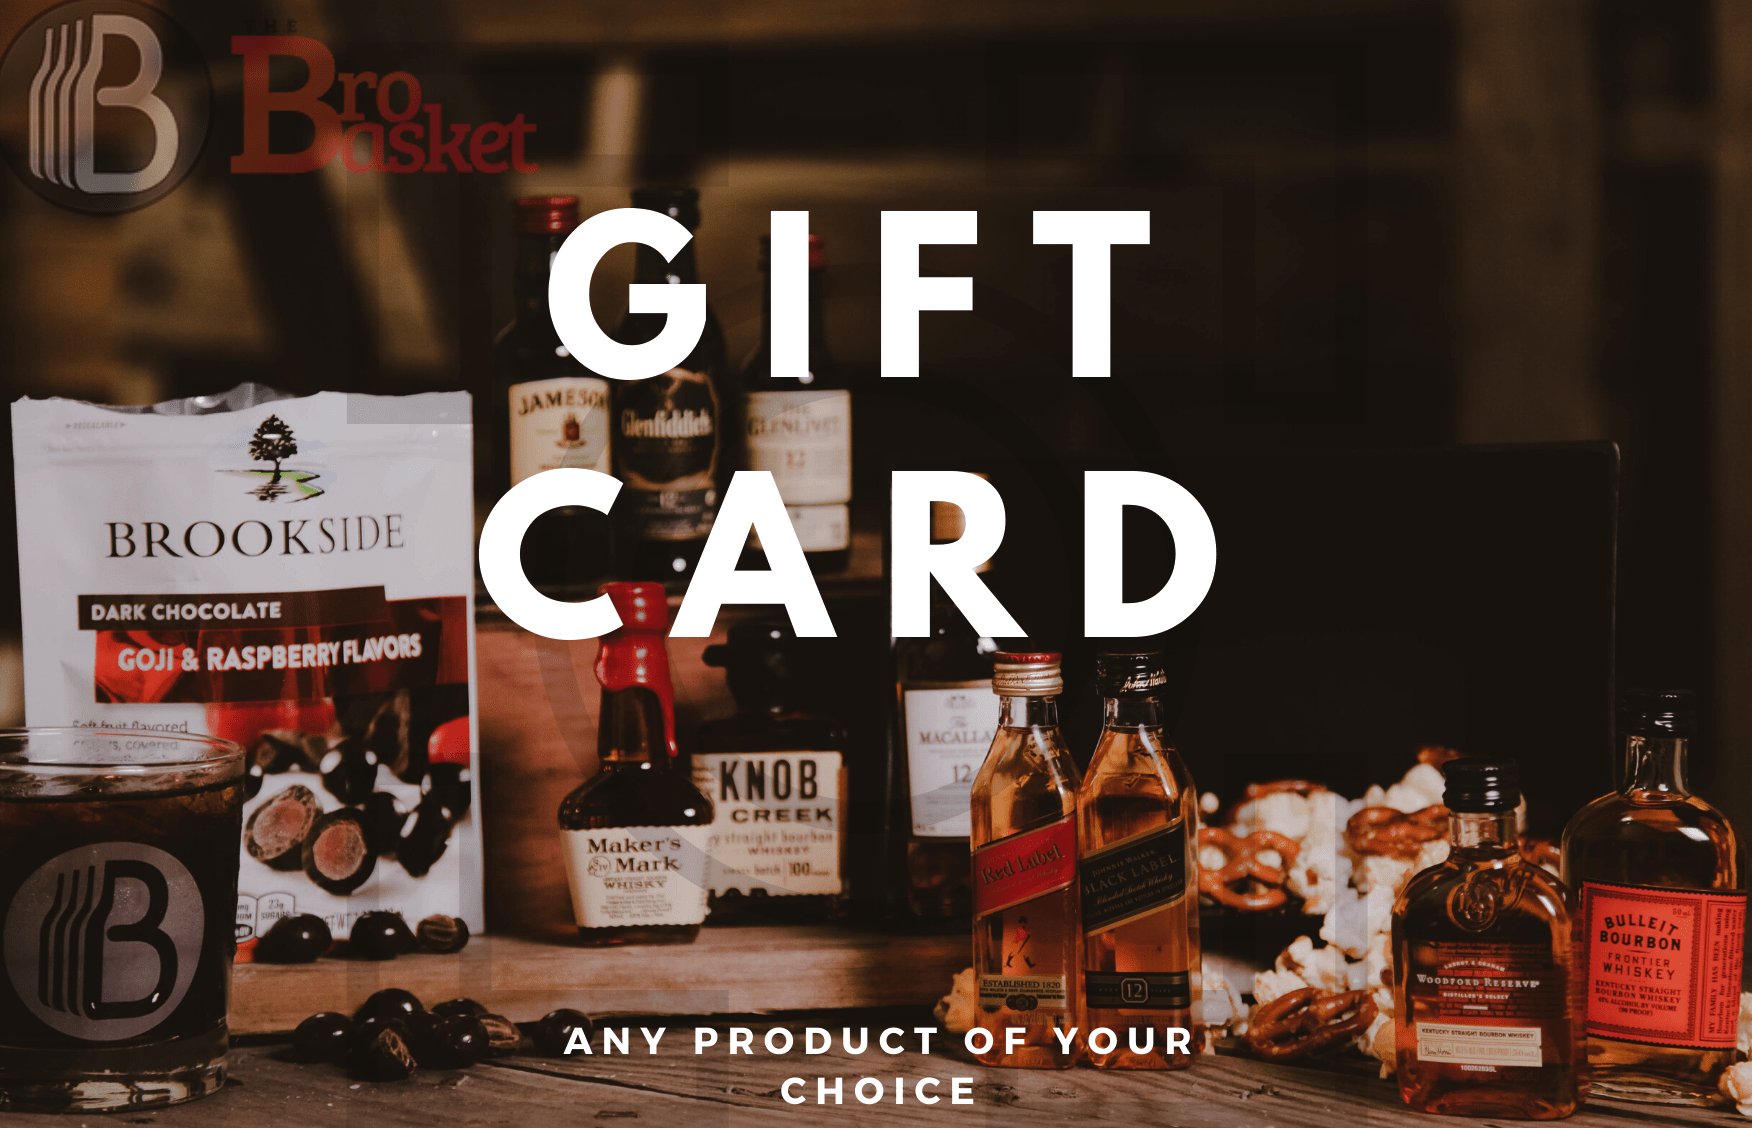 The BroBasket Father's Day Gift Cards